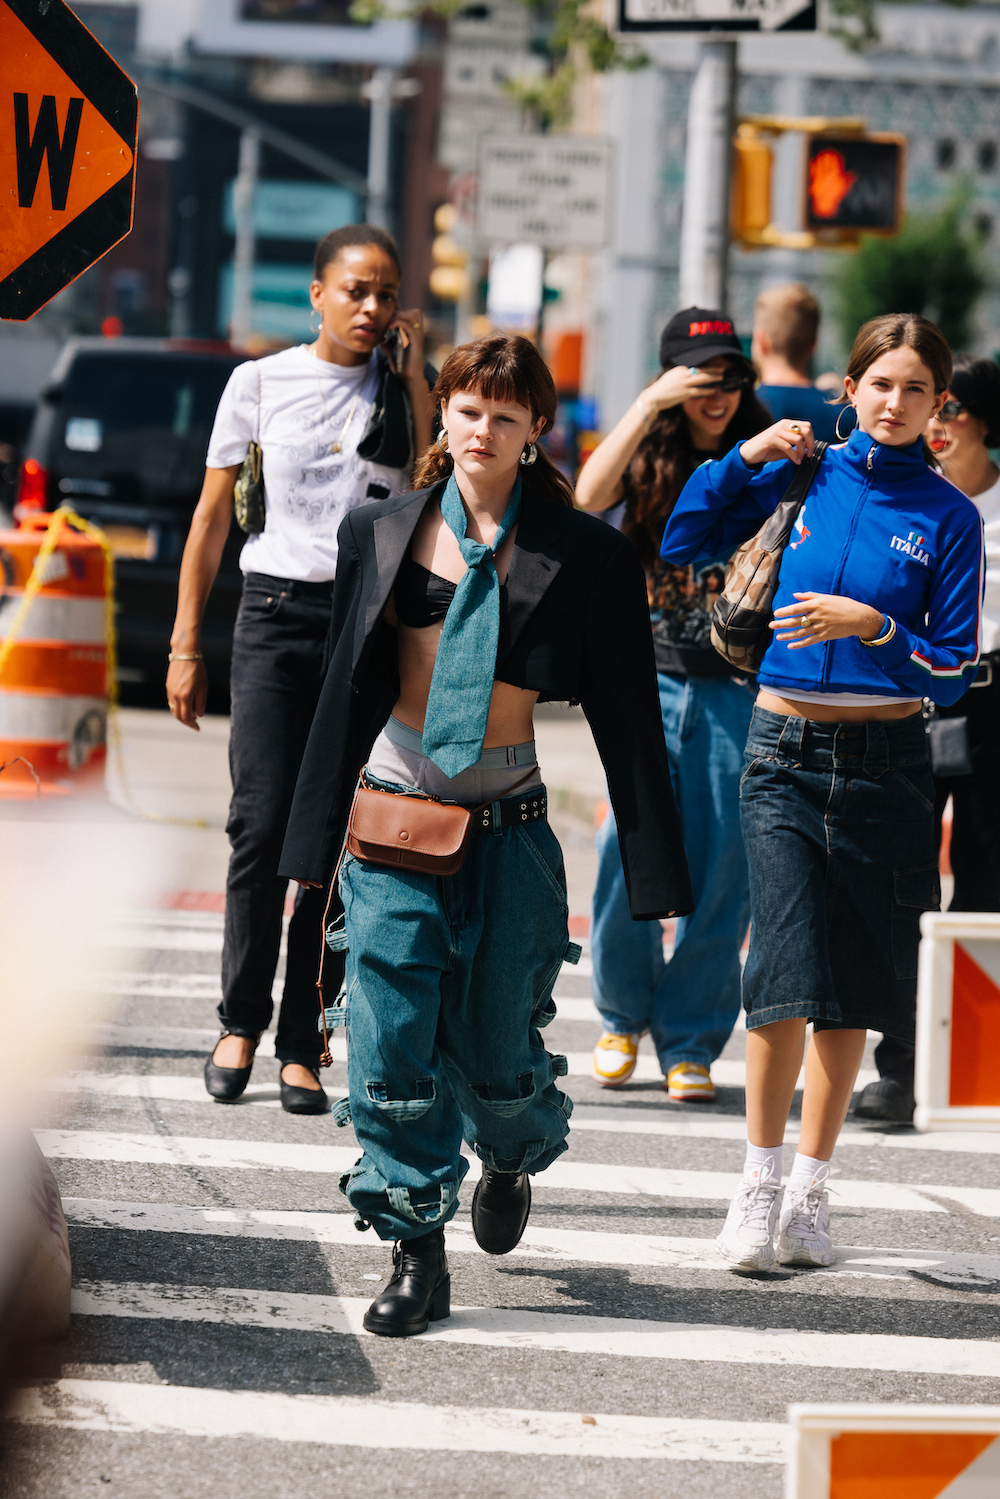 Streetwear Rules at Men's Fashion Week in New York – The Hollywood Reporter